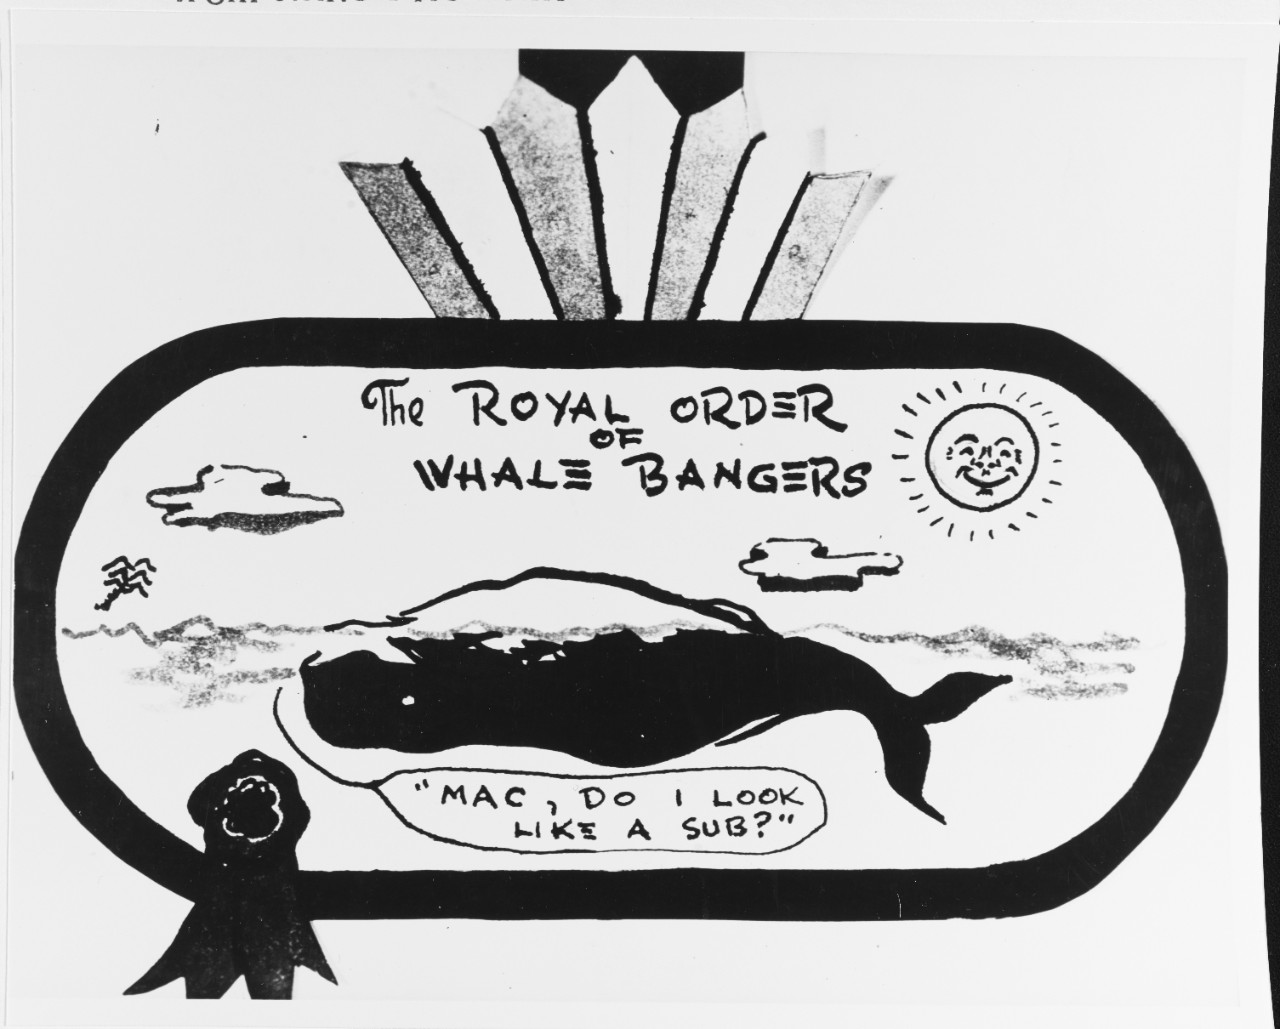 "Royal Order of Whale Bangers"